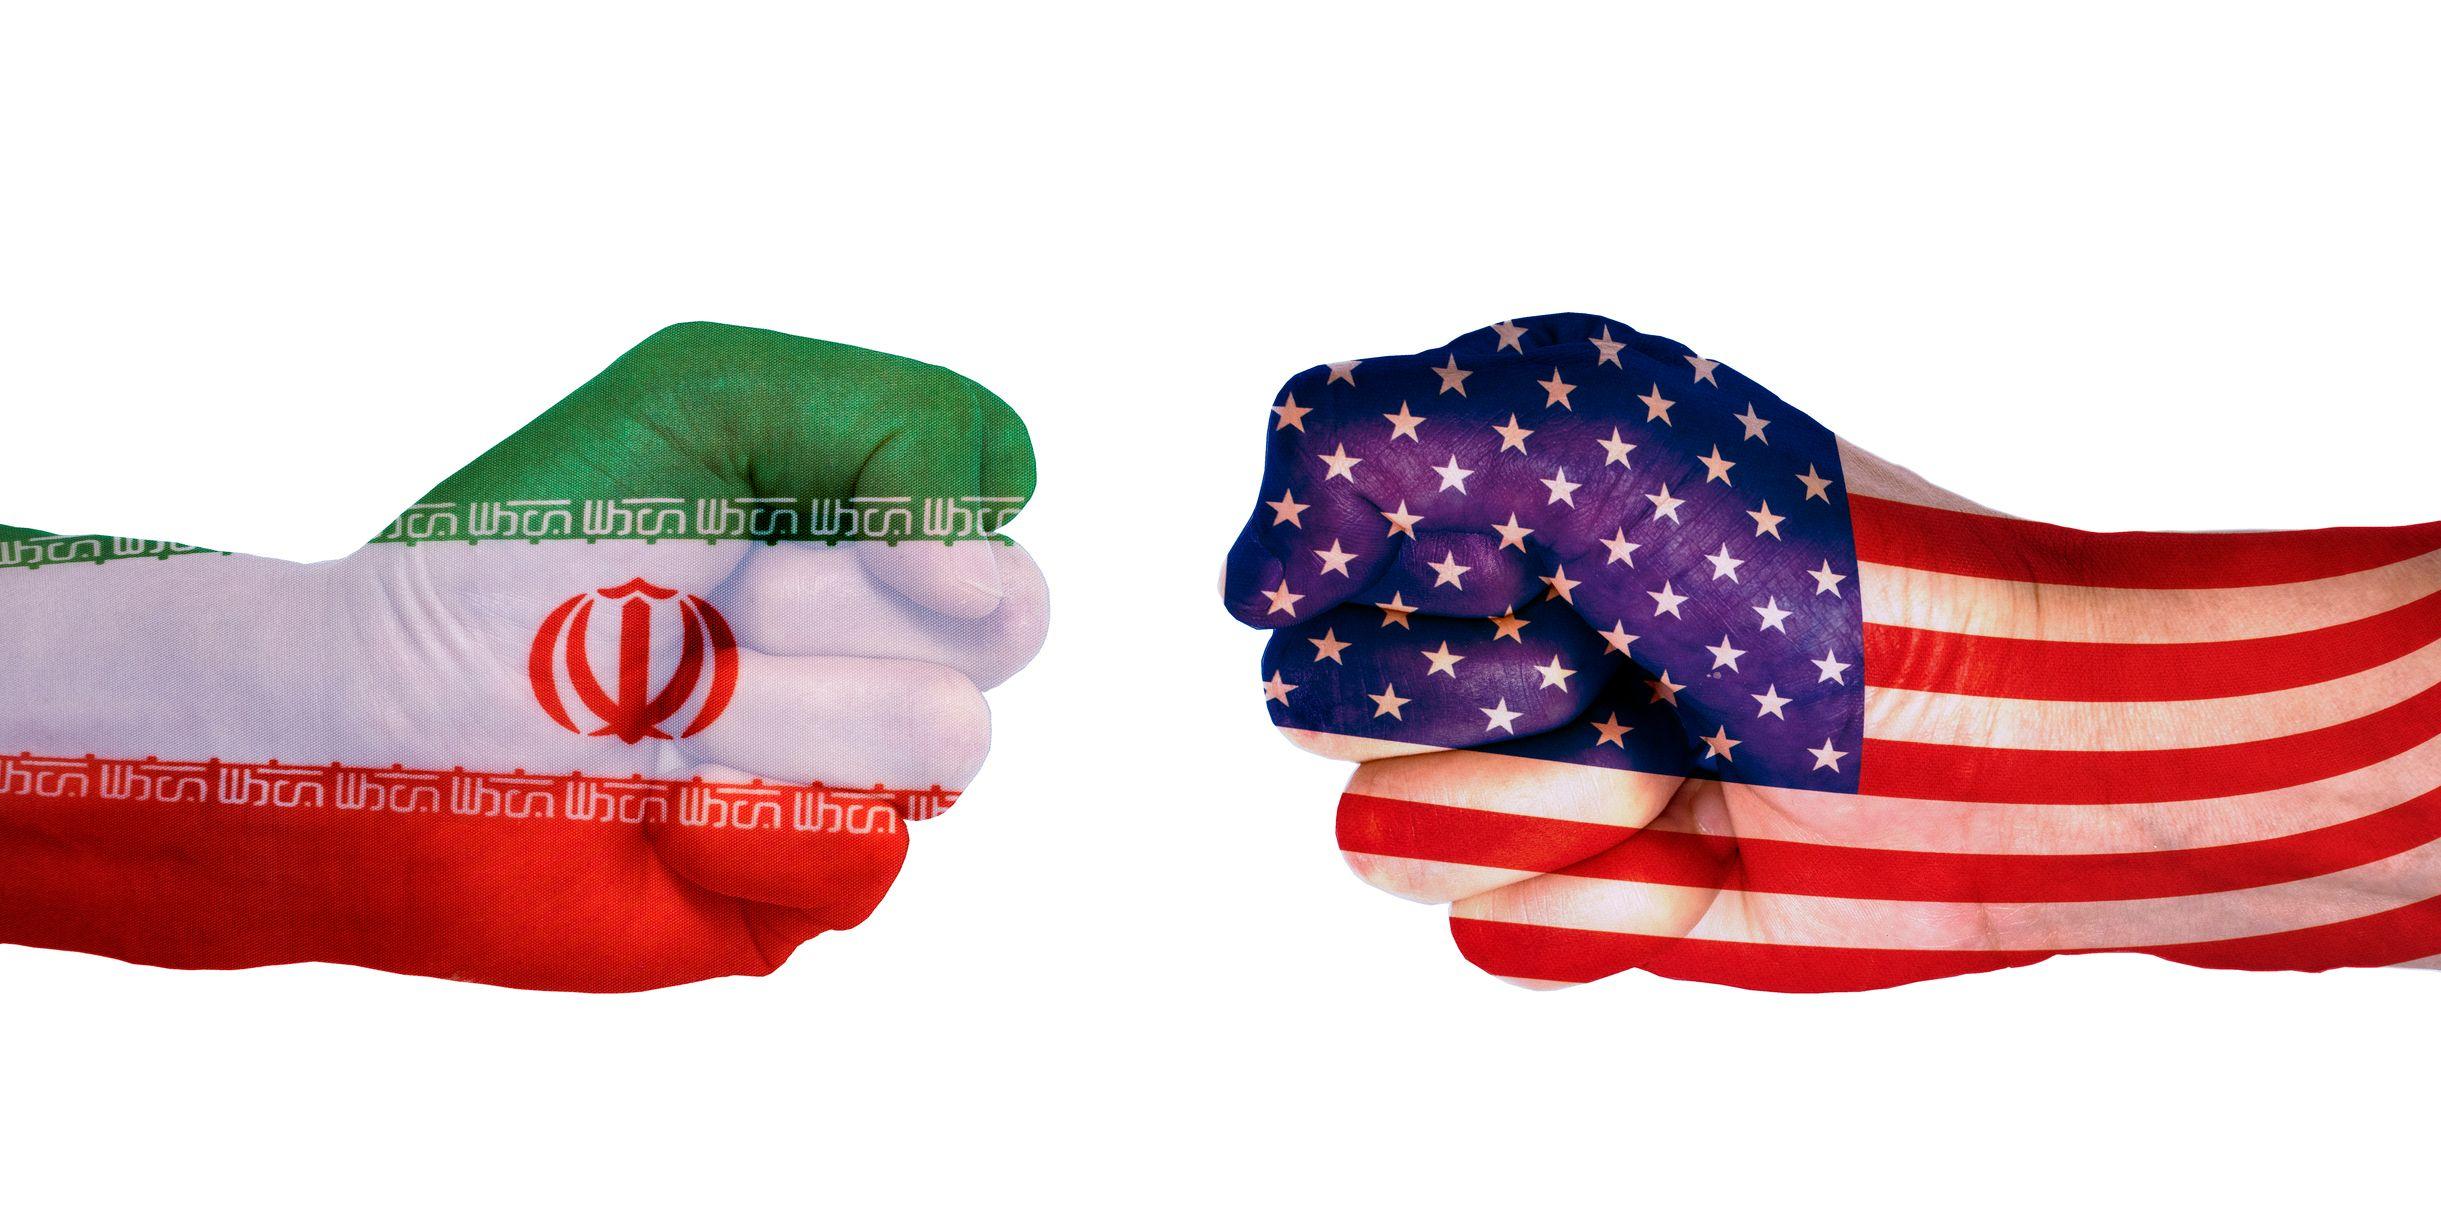 Fists in the colours of the US and Iran flags facing each other